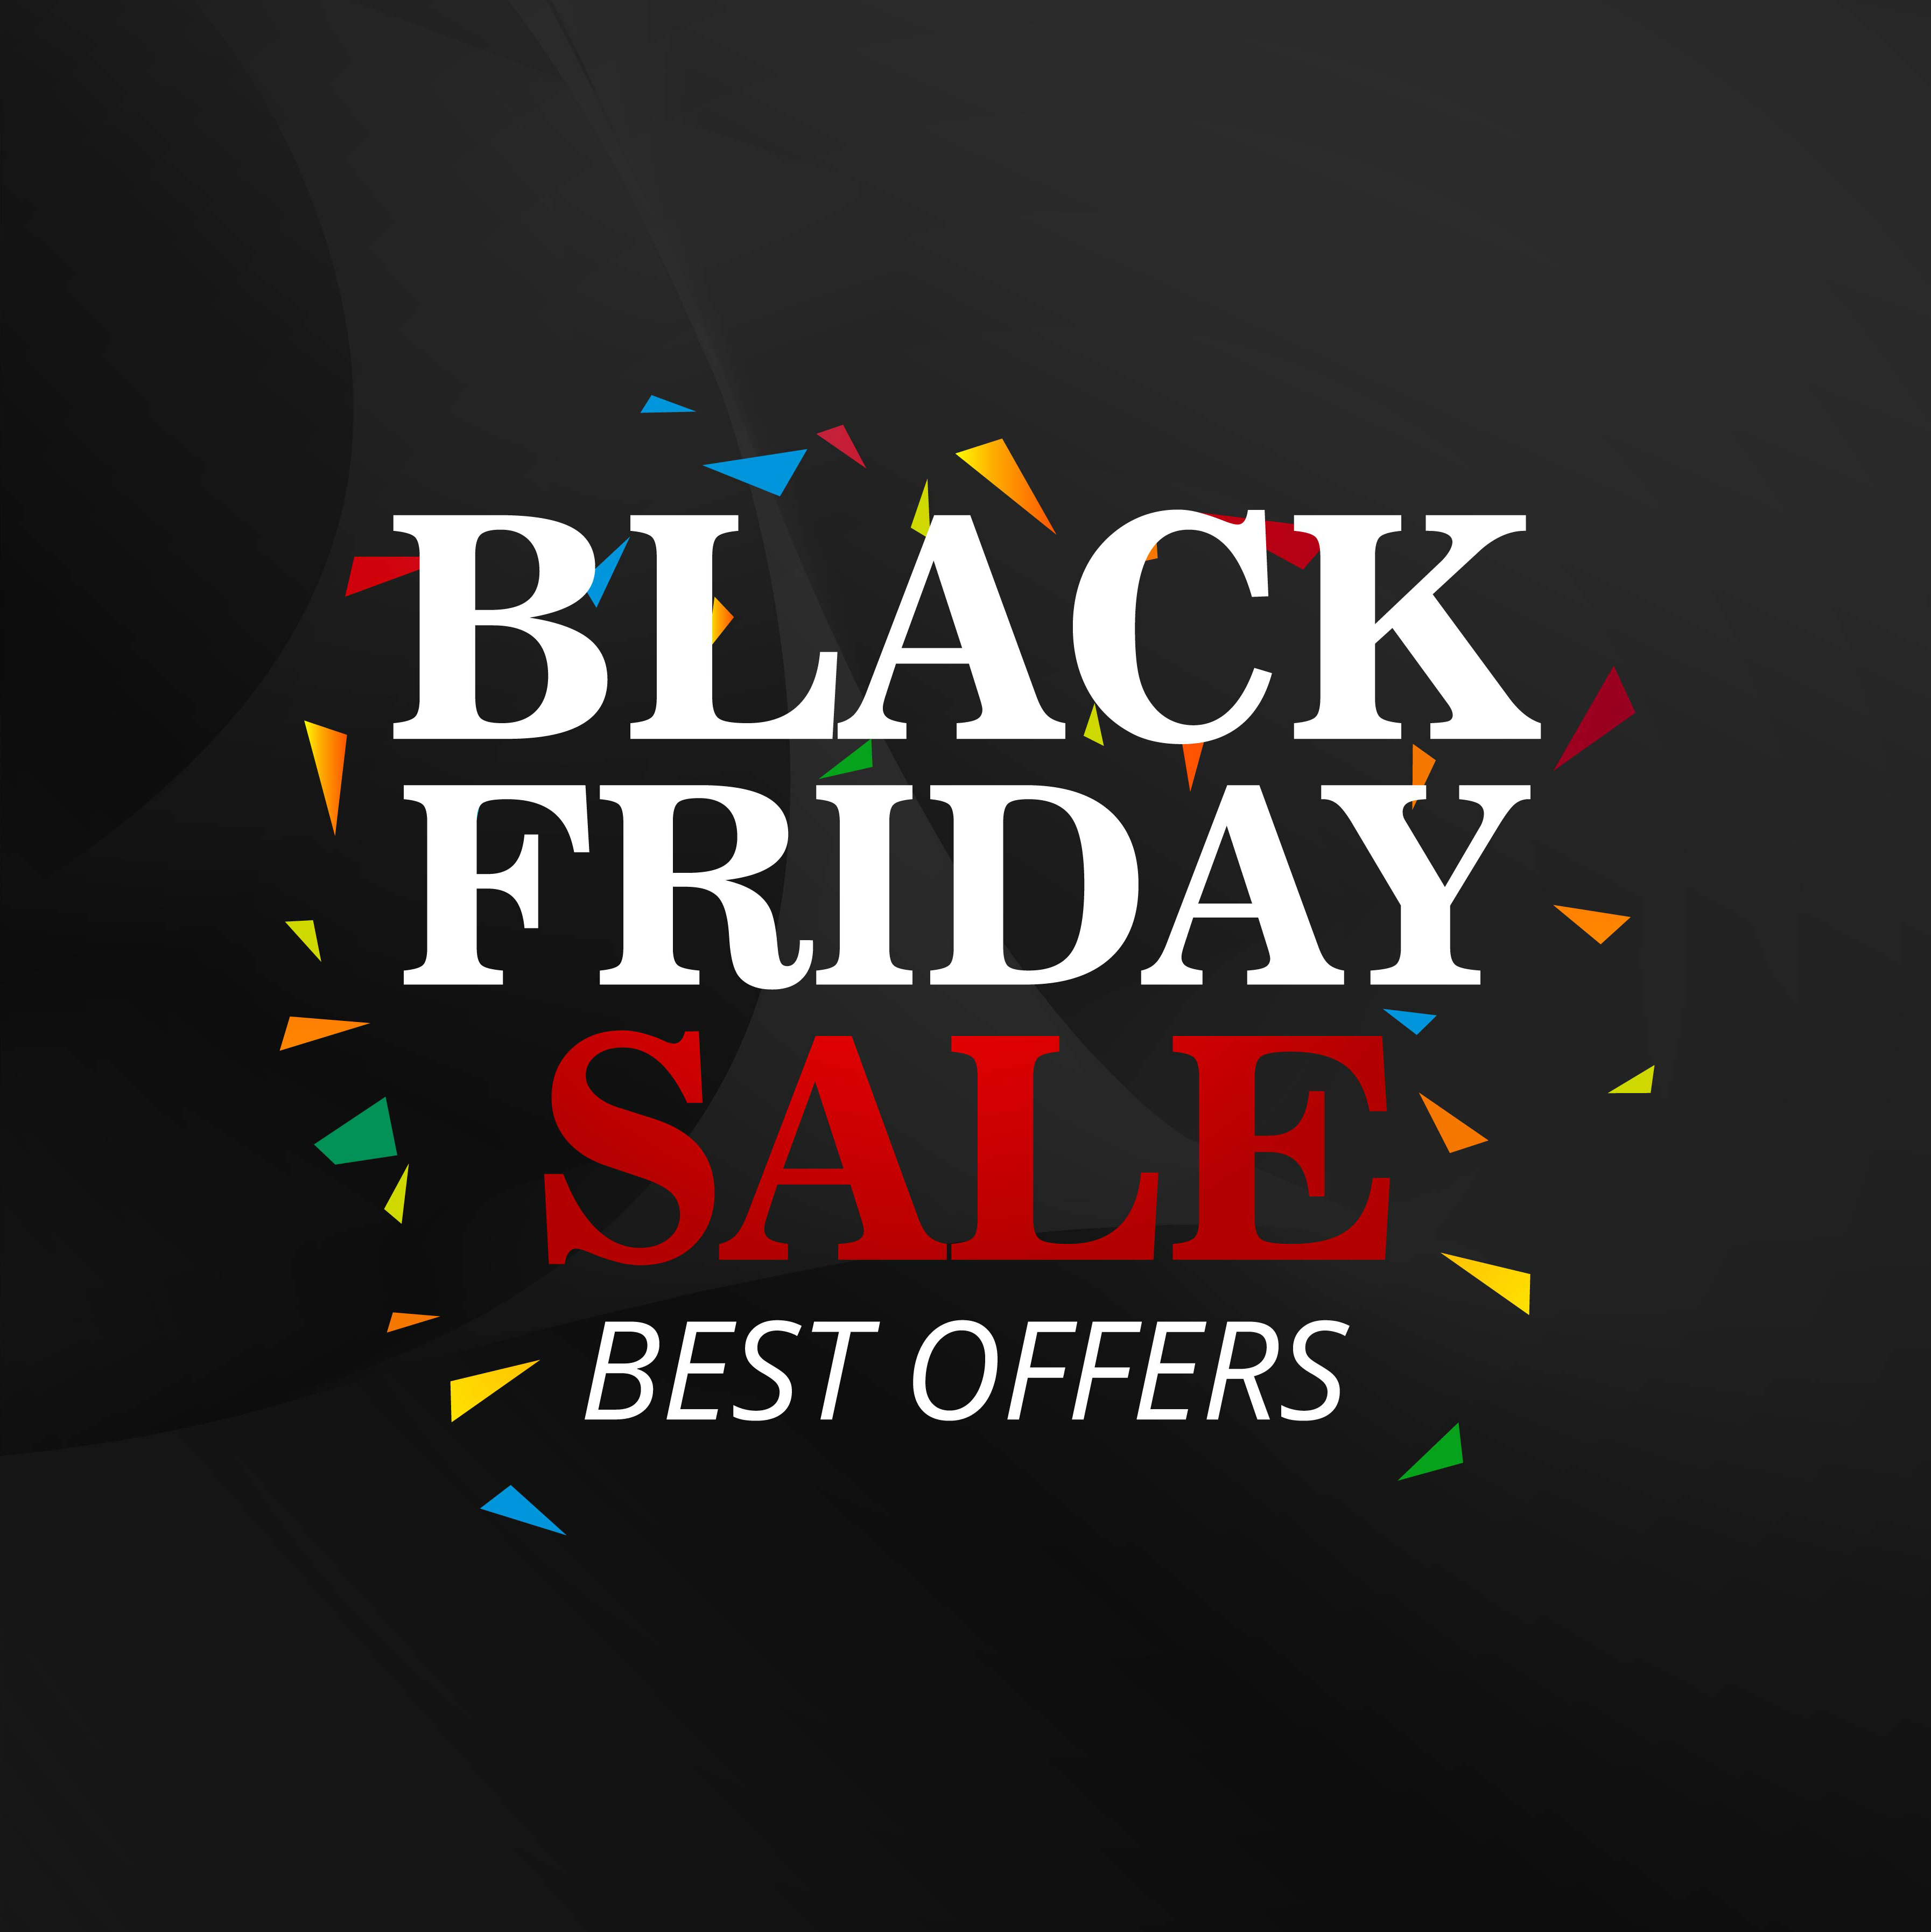 Black friday sale poster design vector illustration 258897 Vector Art - What Sales Are Going On For Black Friday